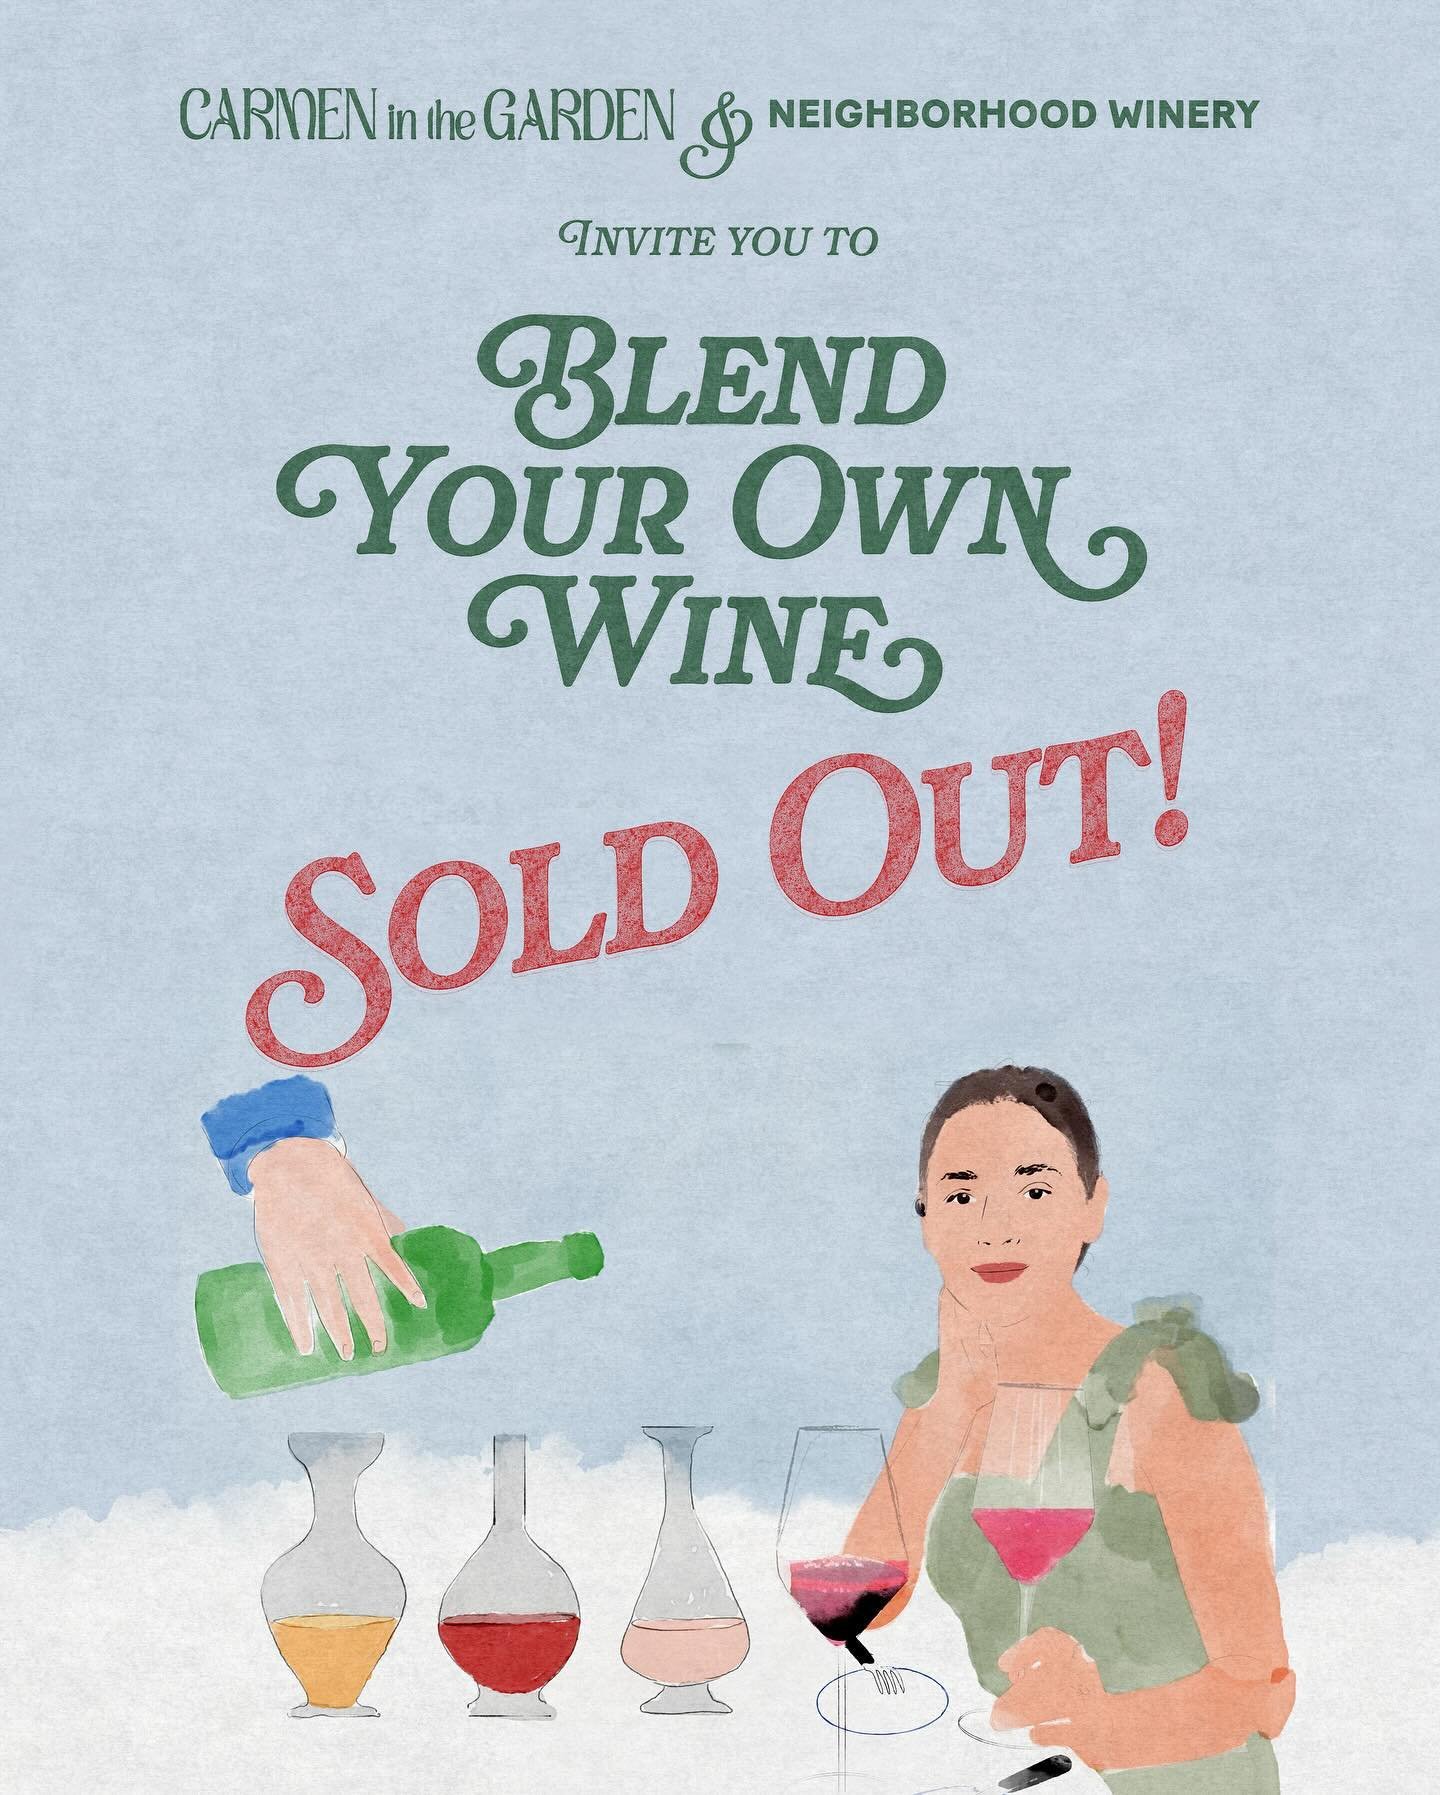 Our wine blending event with @carmeninthegarden in the Arts District is sold out! There are (maybe) still a few spots left for our San Diego event (link in our bio) and certainly a few spots for the events in Santa Barbara and Anaheim. Don&rsquo;t wo